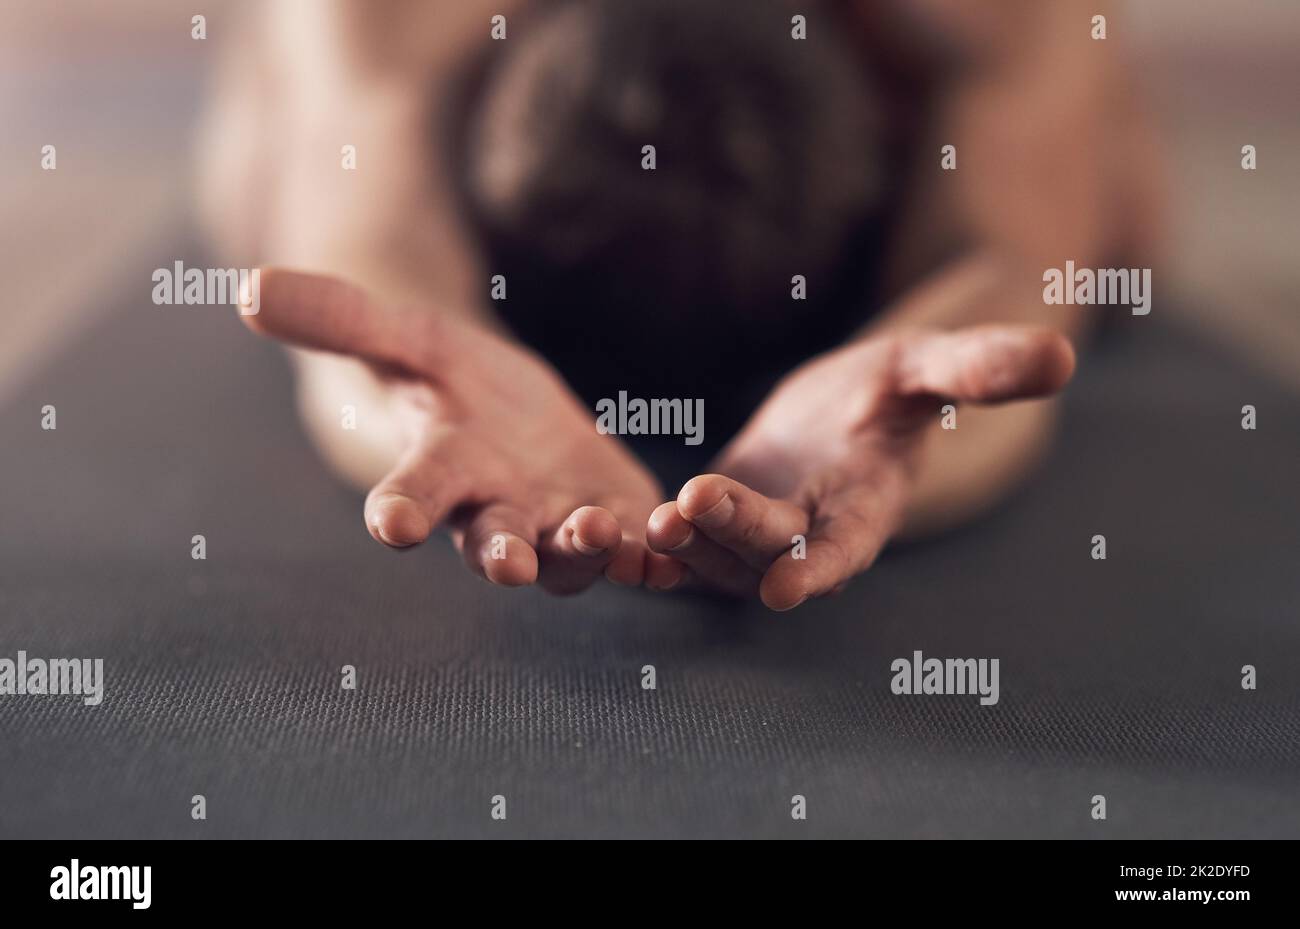 I surrender myself to the zen. Shot of an unrecognizable man stretching and practicing yoga indoors. Stock Photo